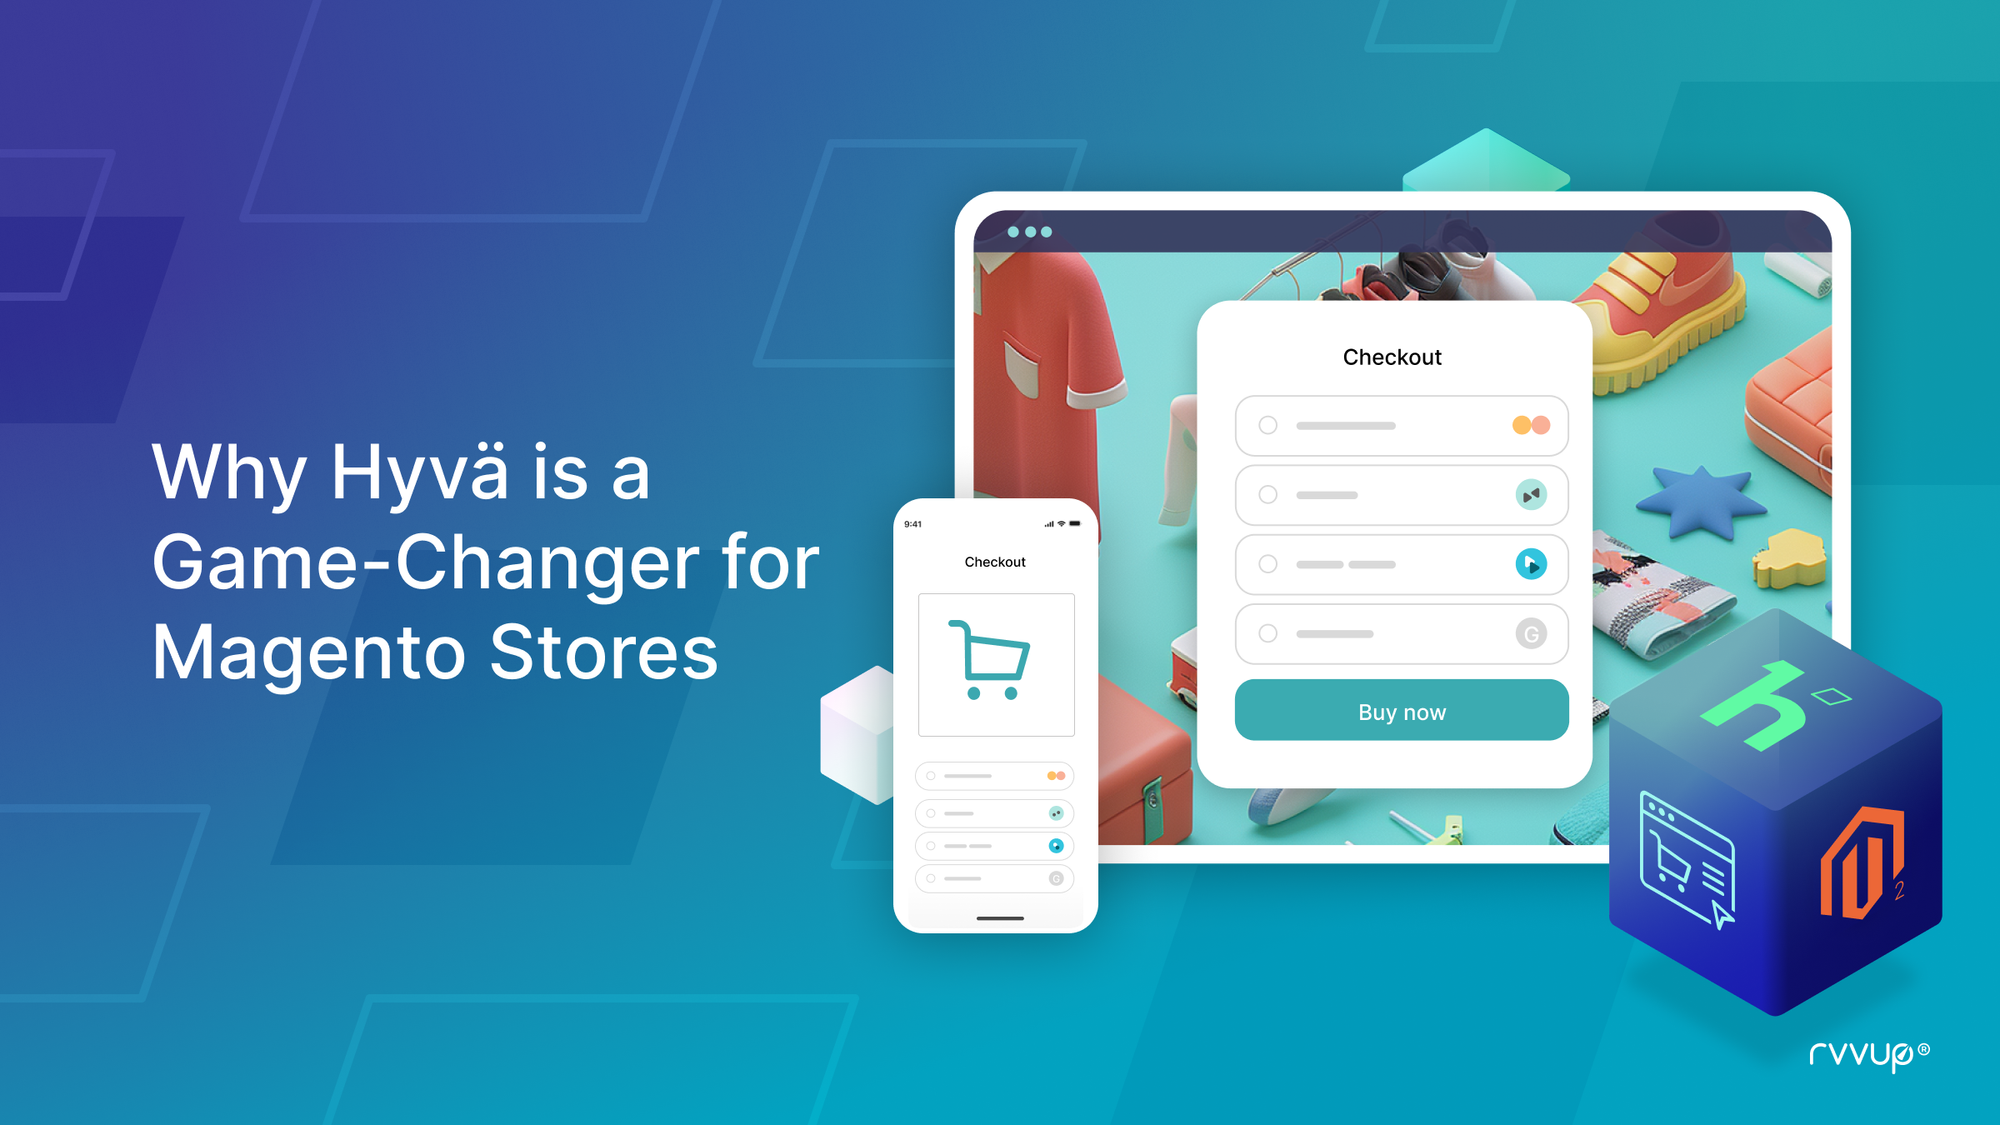 Why Hyvä is a Game-Changer for Magento Stores